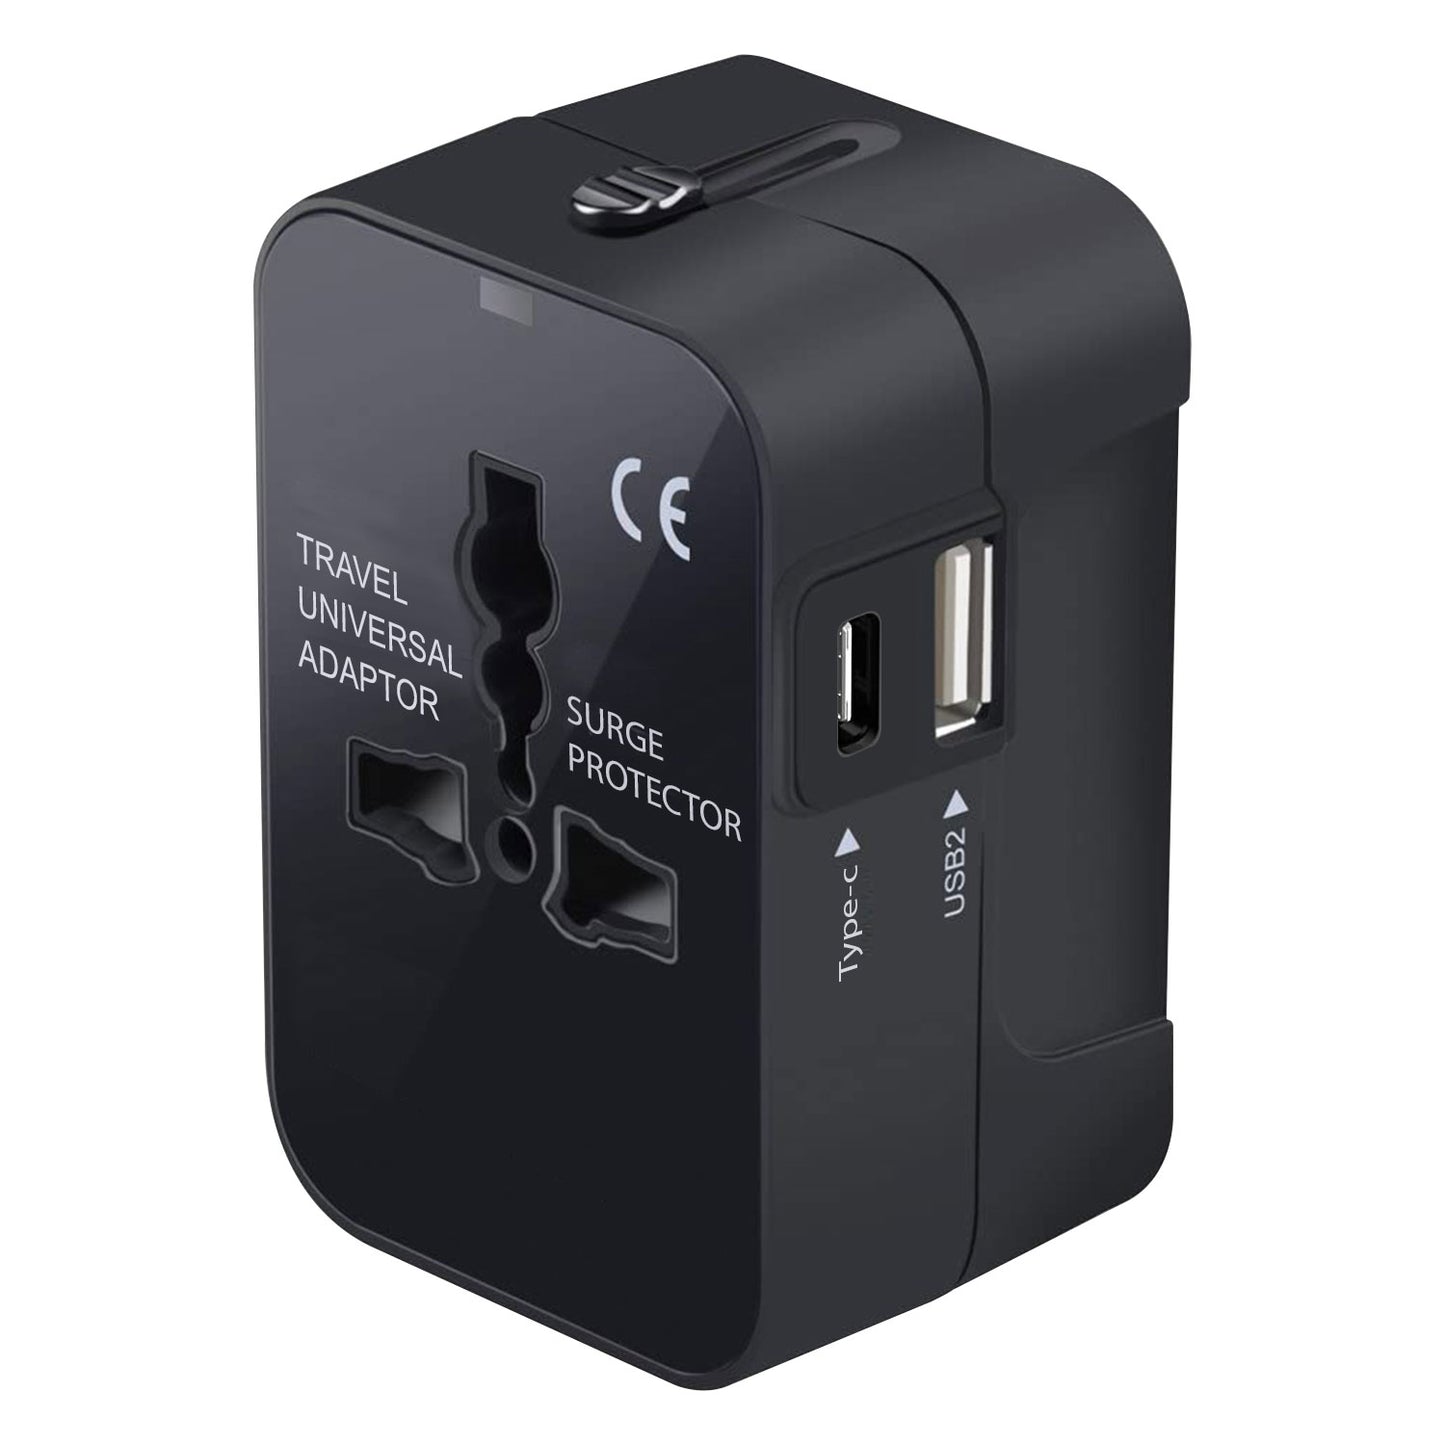 Portable Worldwide Universal Power Adapter Converter All in One International Travel Wall Charger Plug for Wall Plug Input in USA EU UK France Italy Australia India Outlets (With USB-A and USB-C)